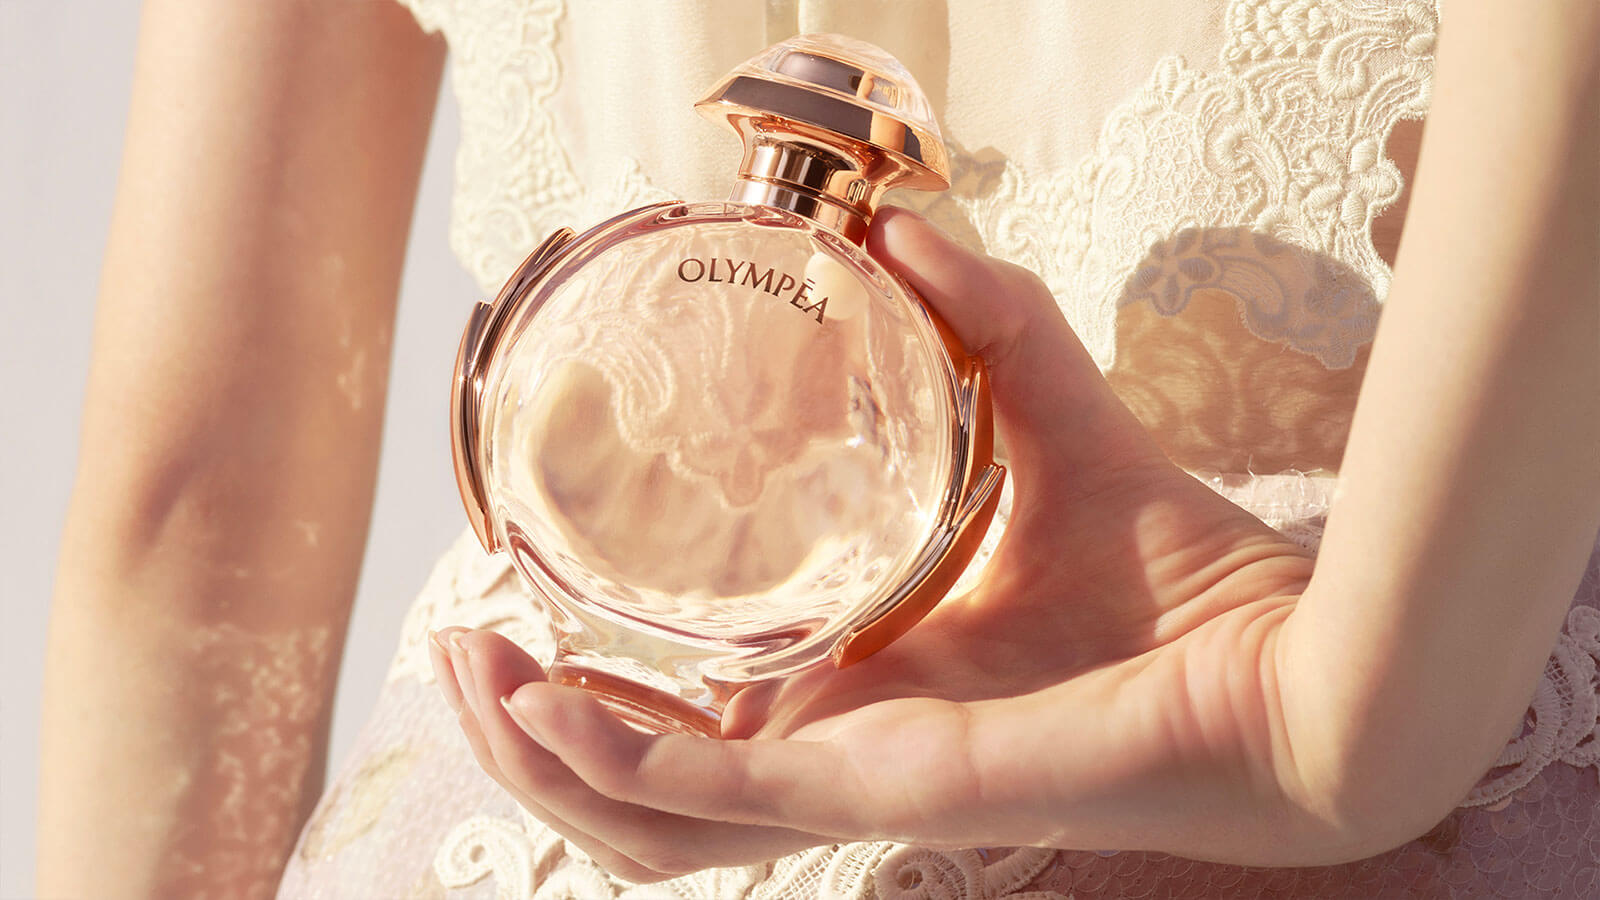 Top 10 Most Expensive Luxury Perfume Brands for Women in 2022 (with prices)